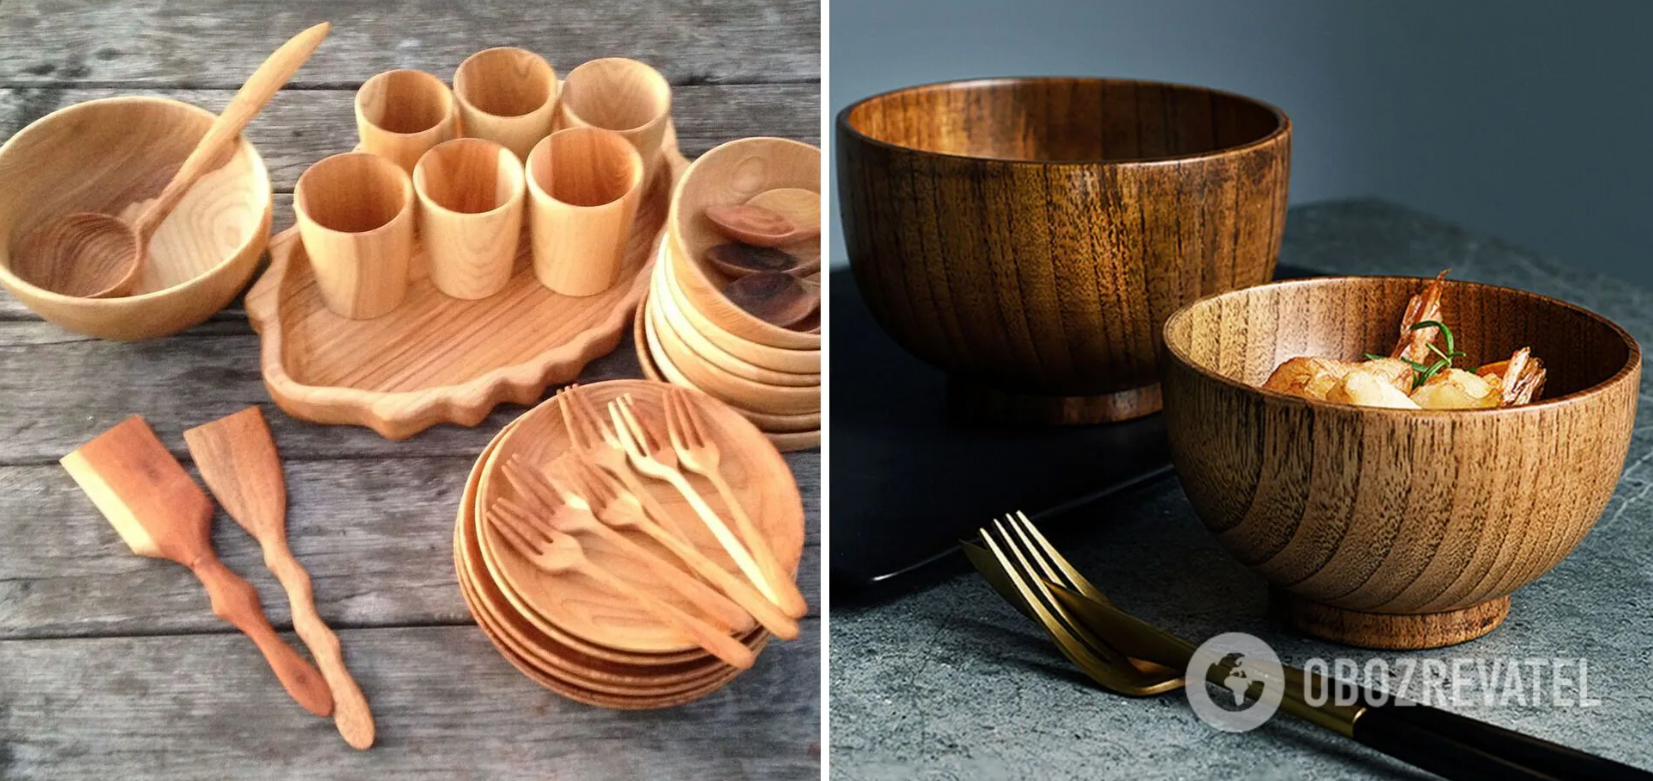 How not to wash wood dishes